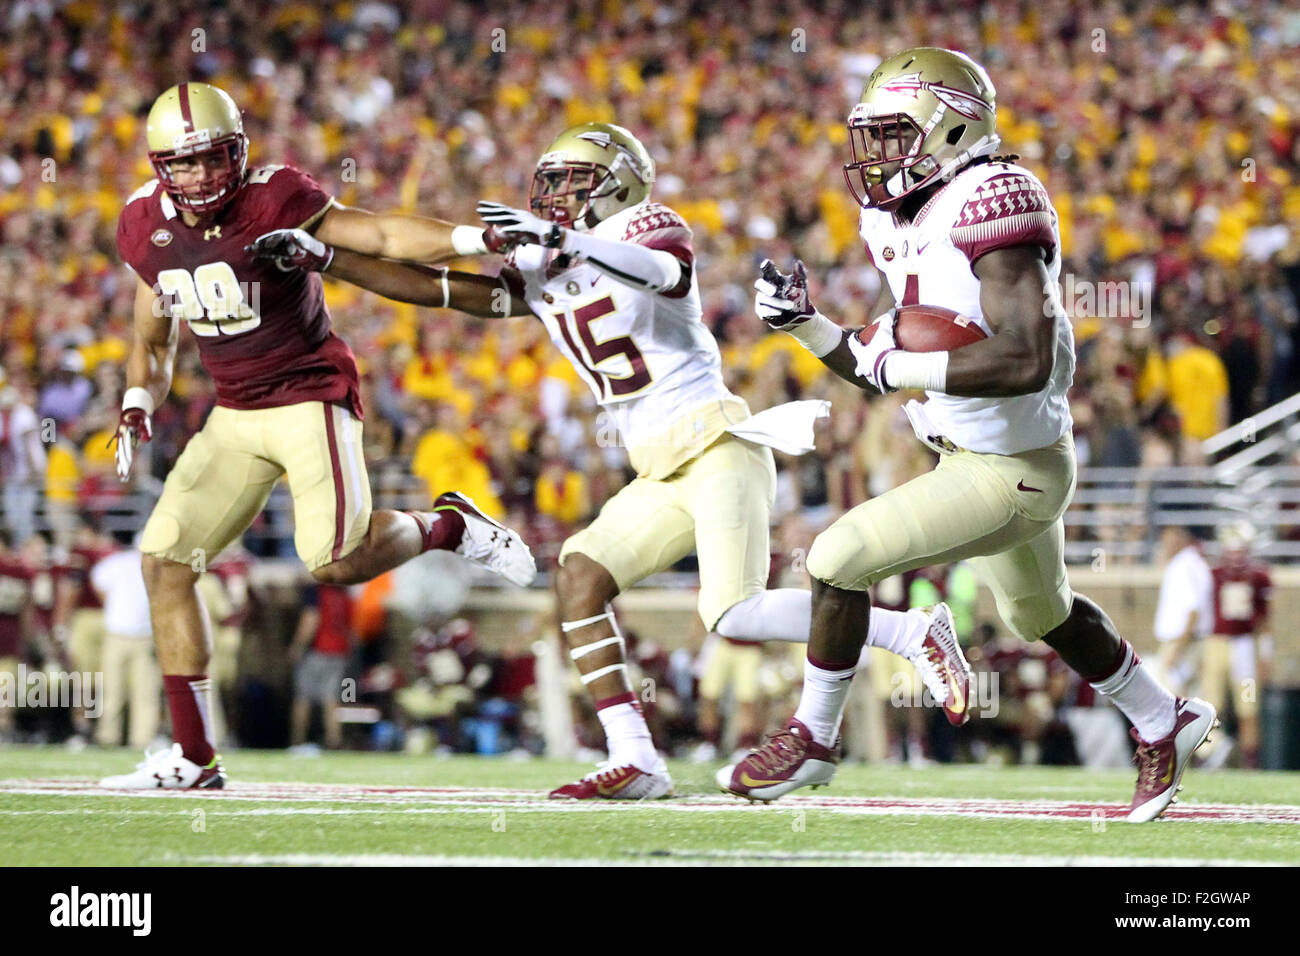 September 18, 2015; Chestnut Hill, MA, USA; Florida State Seminoles wide receiver Travis Rudolph (15) blocks Boston College Eagles linebacker Matt Milano (28) as Florida State Seminoles running back Dalvin Cook (4) runs with the ball during the second half of the NCAA football game between the Boston College Eagles and Florida State Seminoles at Alumni Stadium. Florida State defeated Boston College 14-0. Anthony Nesmith/Cal Sport Media Stock Photo